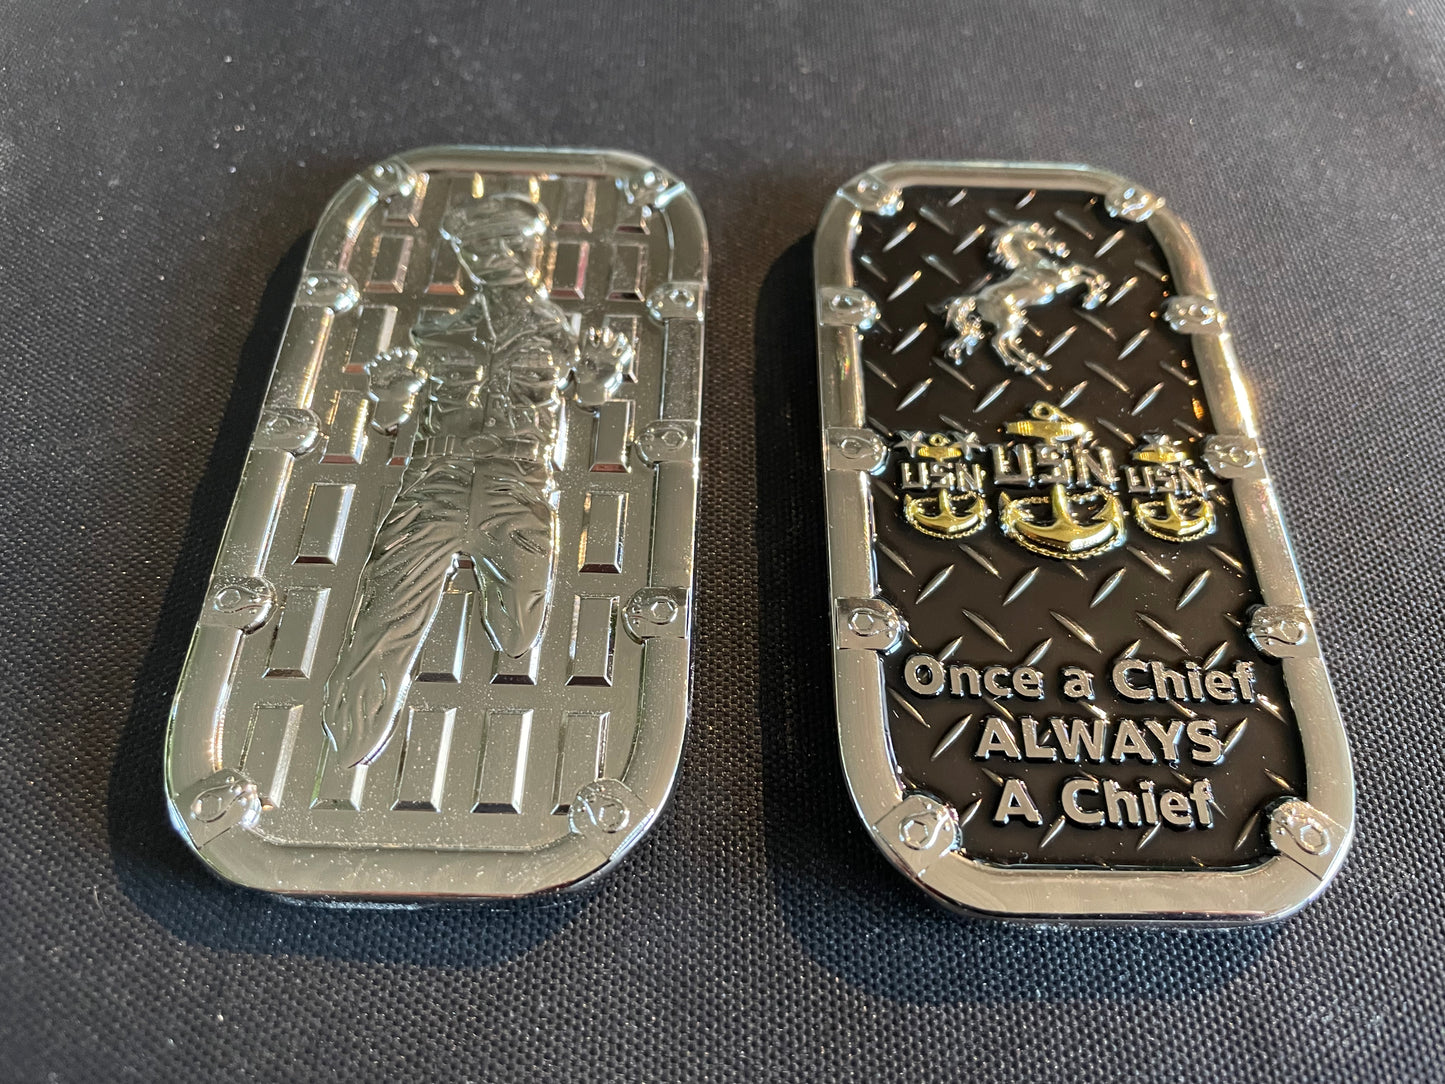 Once a Chief Challenge Coin